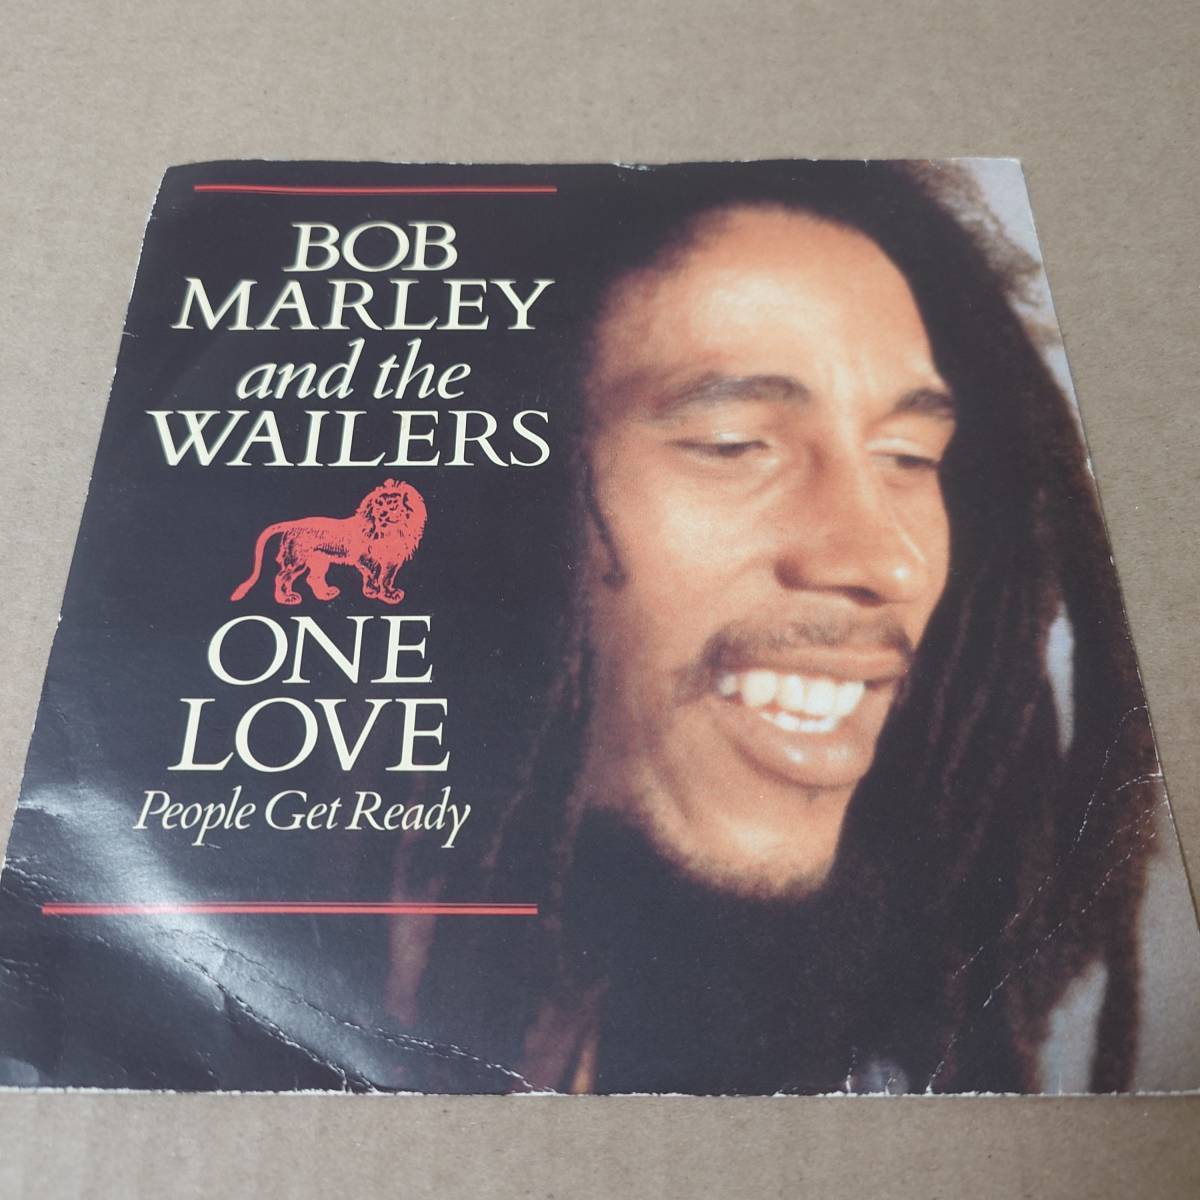 Bob Marley & The Wailers - One Love / So Much Trouble In The World // Island Records 7inch / Roots_画像1